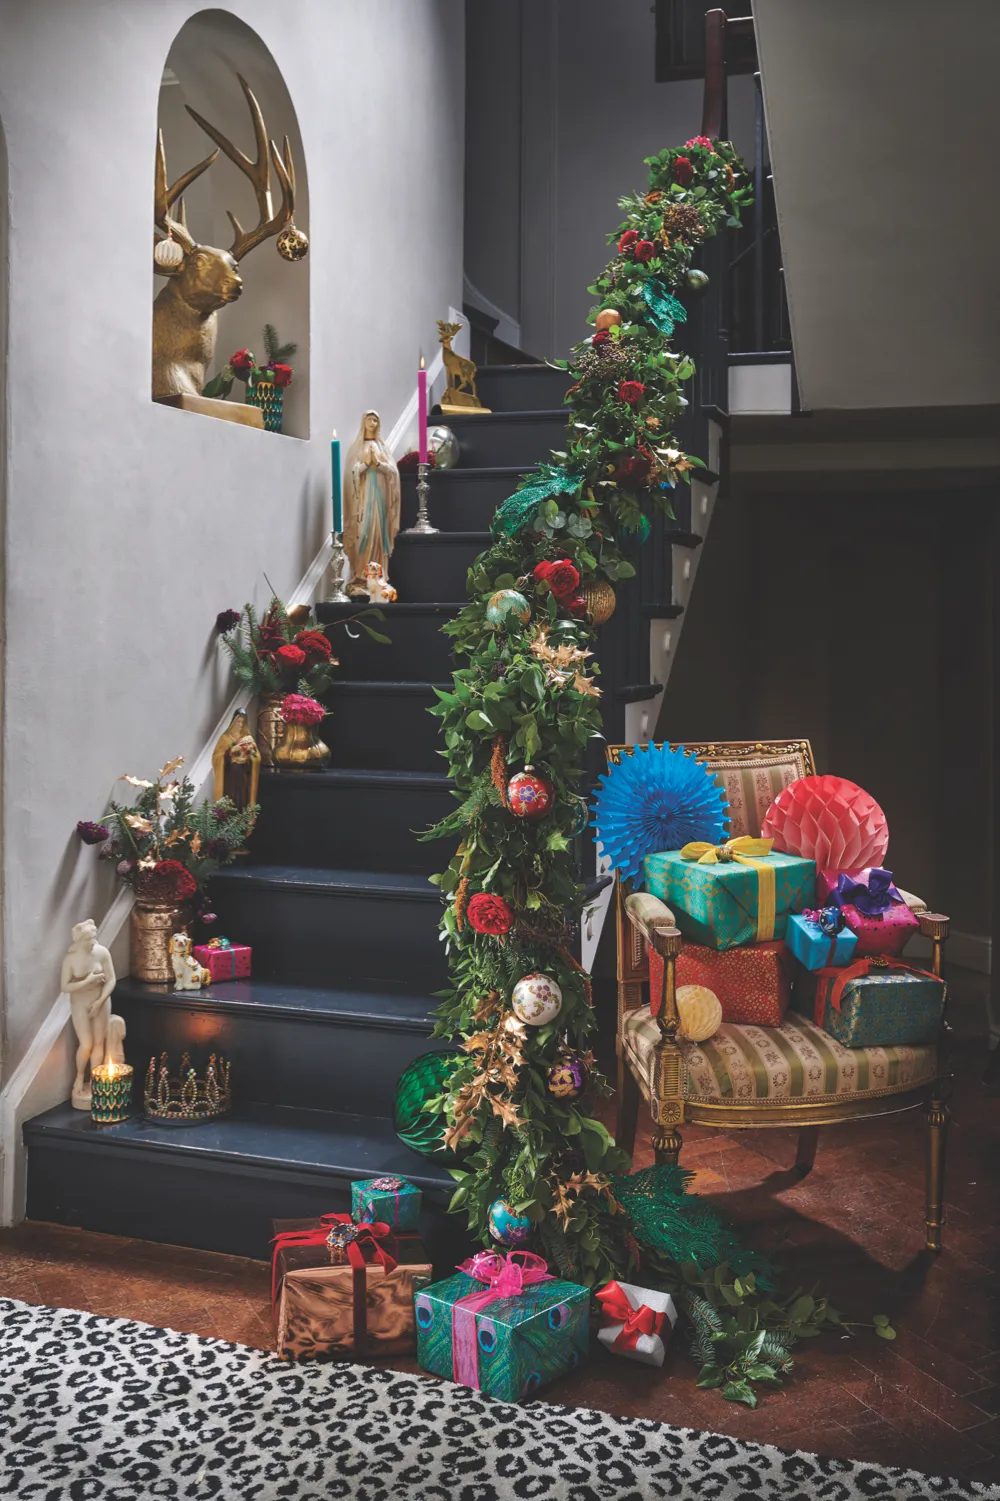 Staircase decorated with swags of greenery and oversized baubles